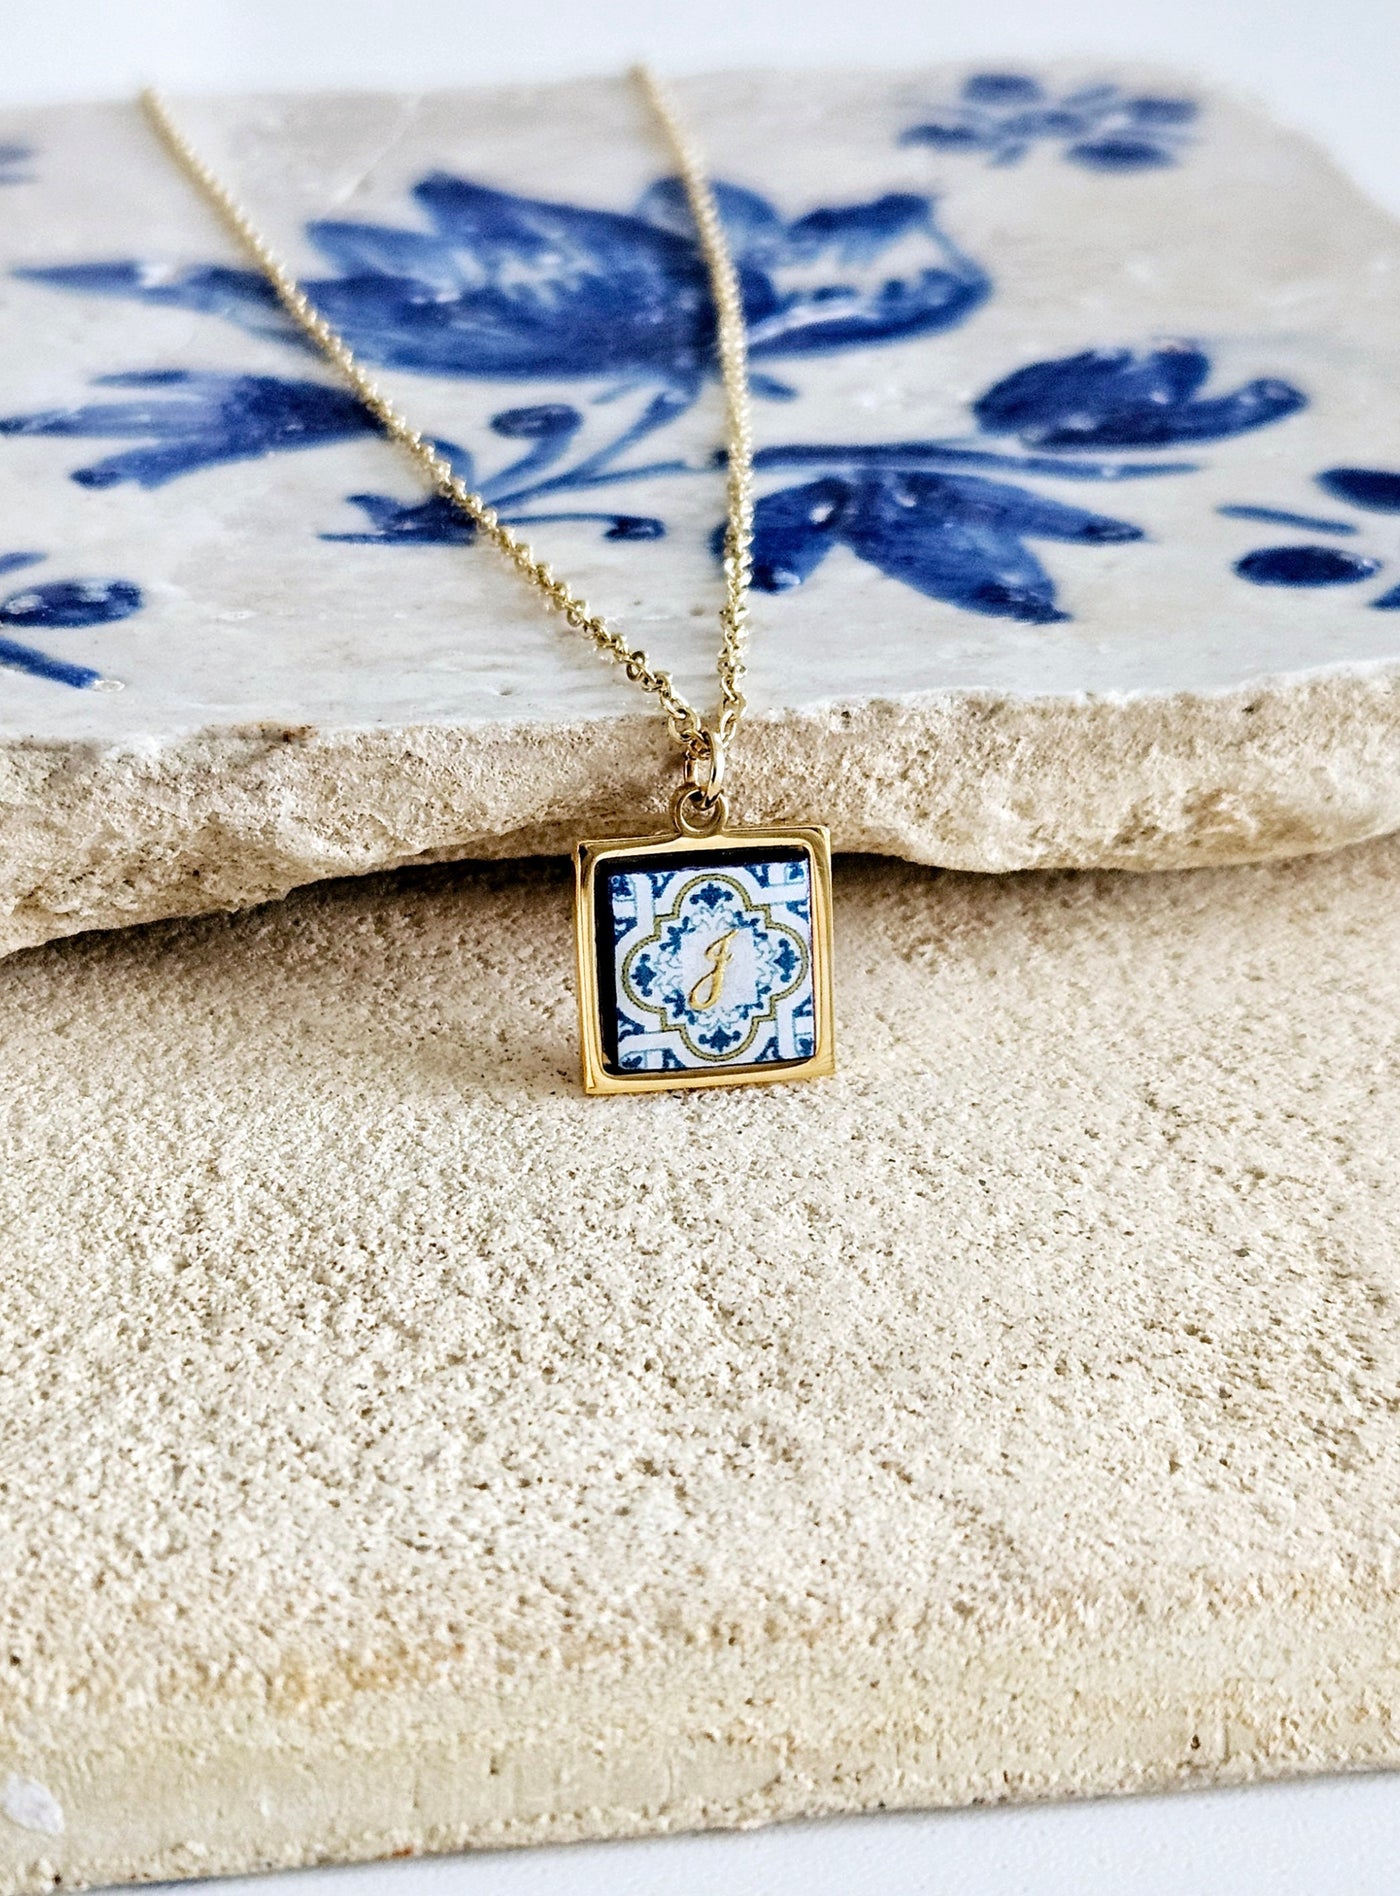 Initial Tile Necklace Silver Gold Rose Gold Custom Letter Charm Mother Gift Personalized Pendant Bridesmaid Portuguese Small Azulejo Tile